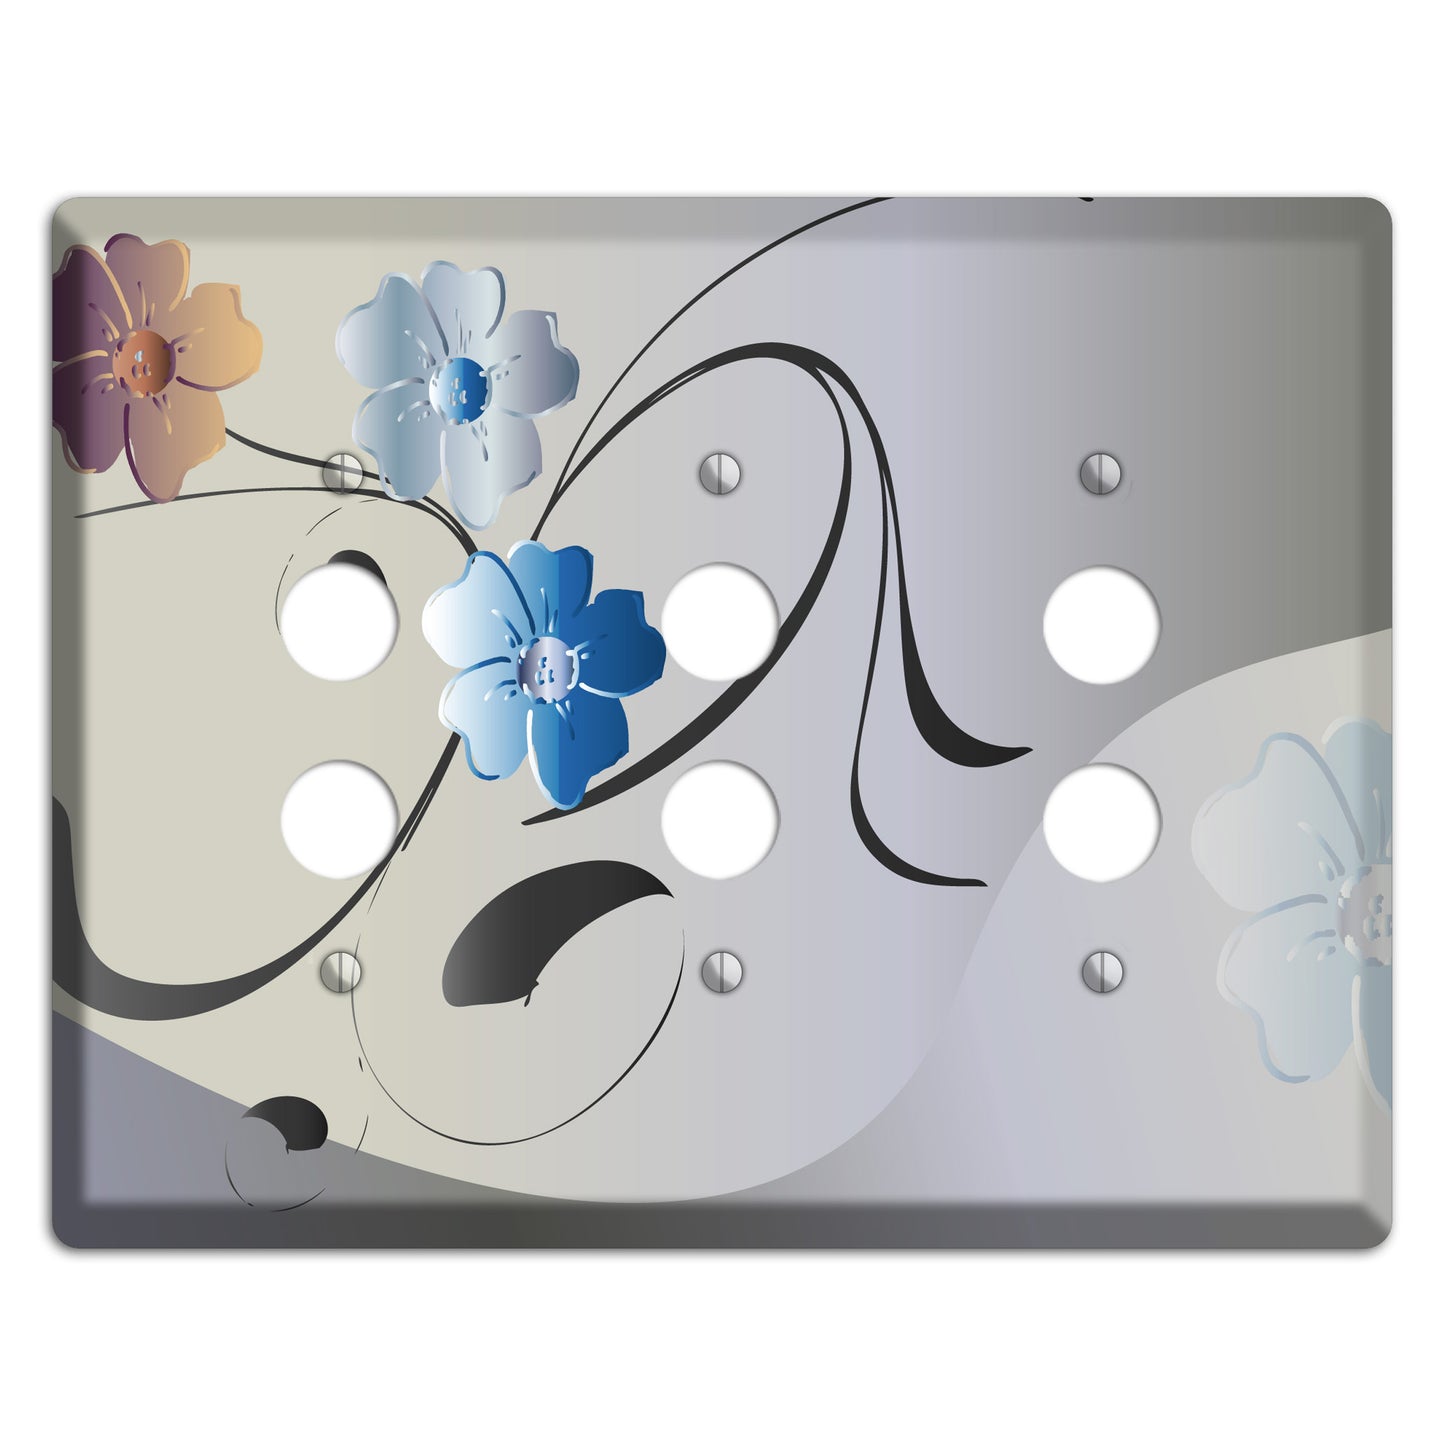 Grey and Blue Floral Sprig 3 Pushbutton Wallplate